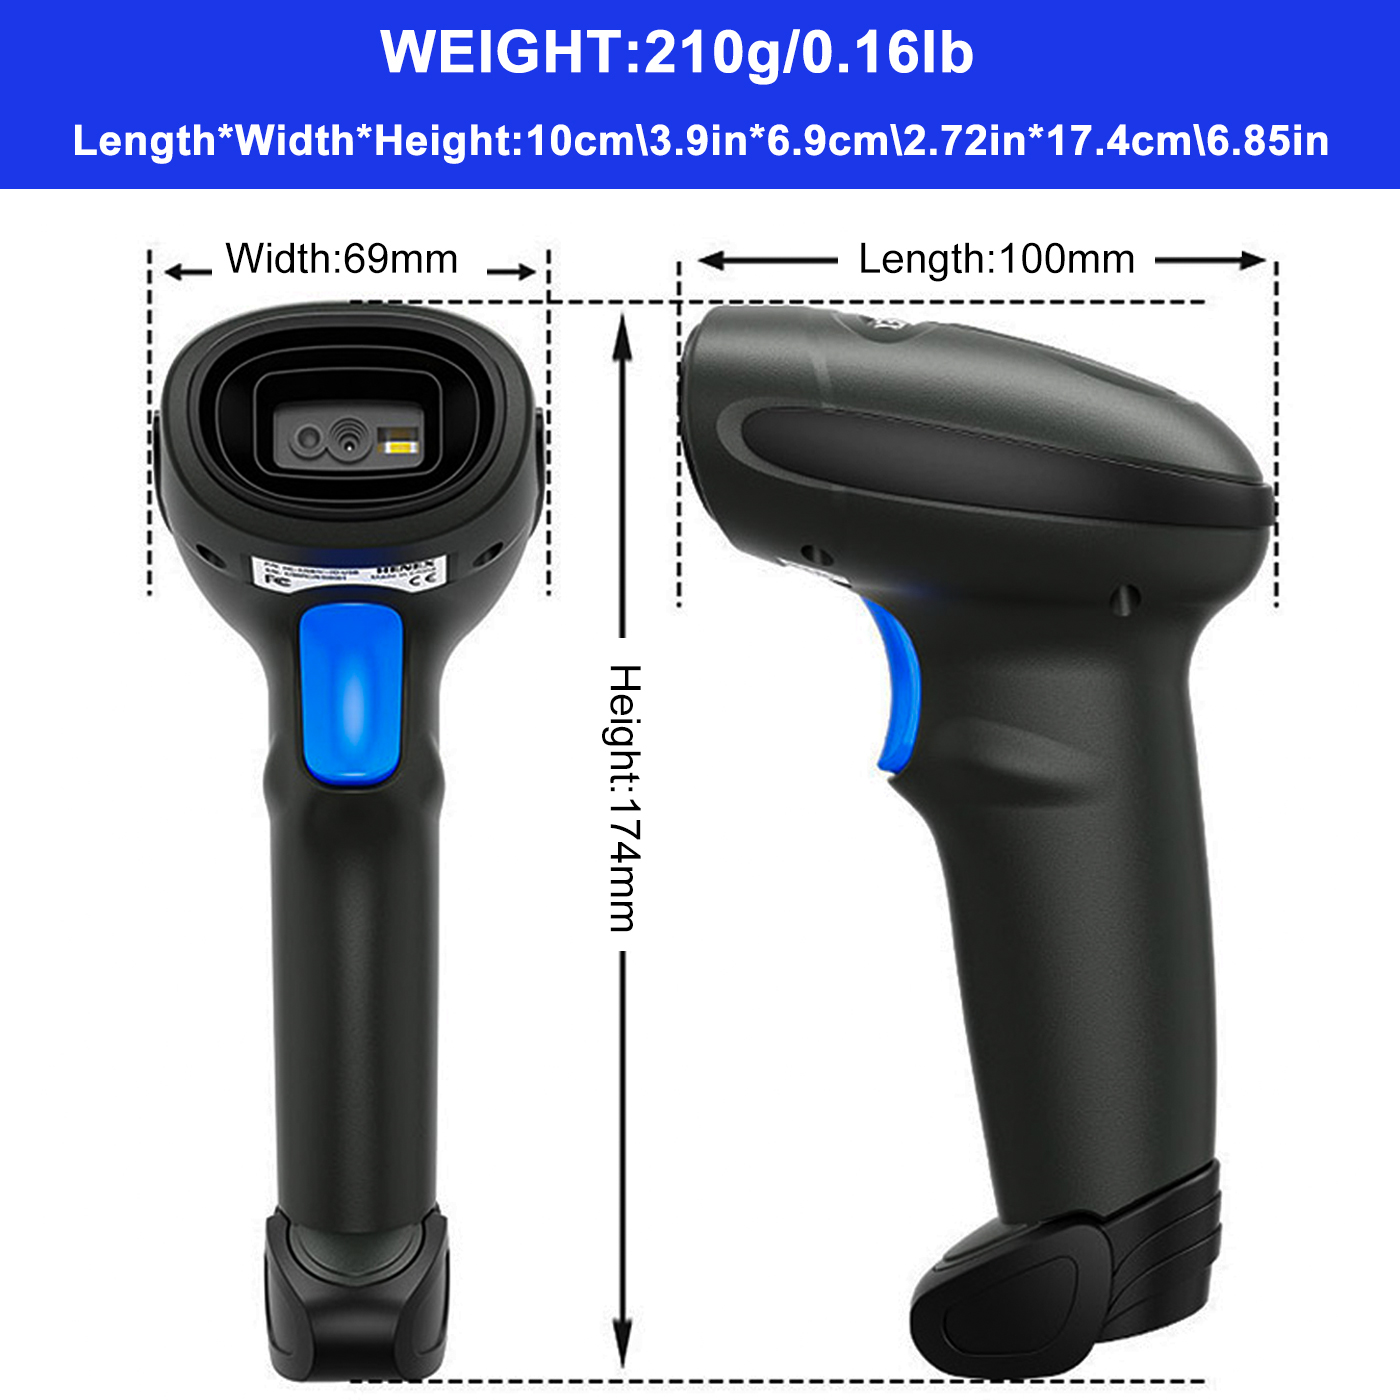 Wireless barcode scanner for food service